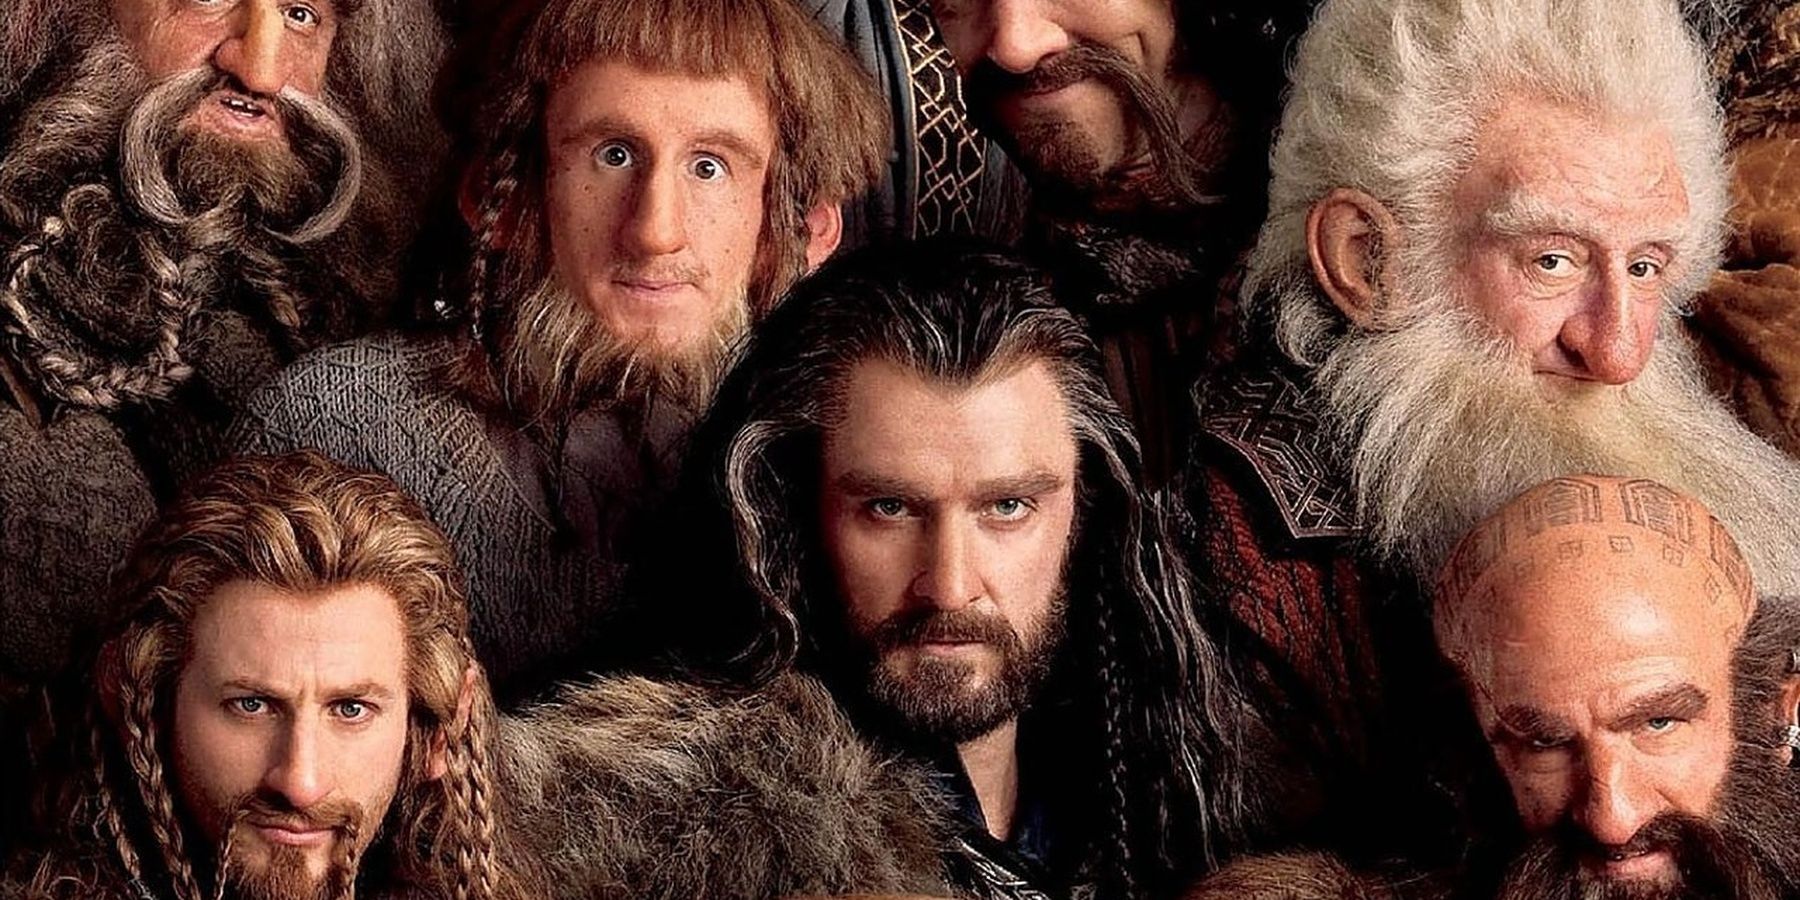 The Hobbit Originally Had a Different Origin for Lord of the Rings' One Ring